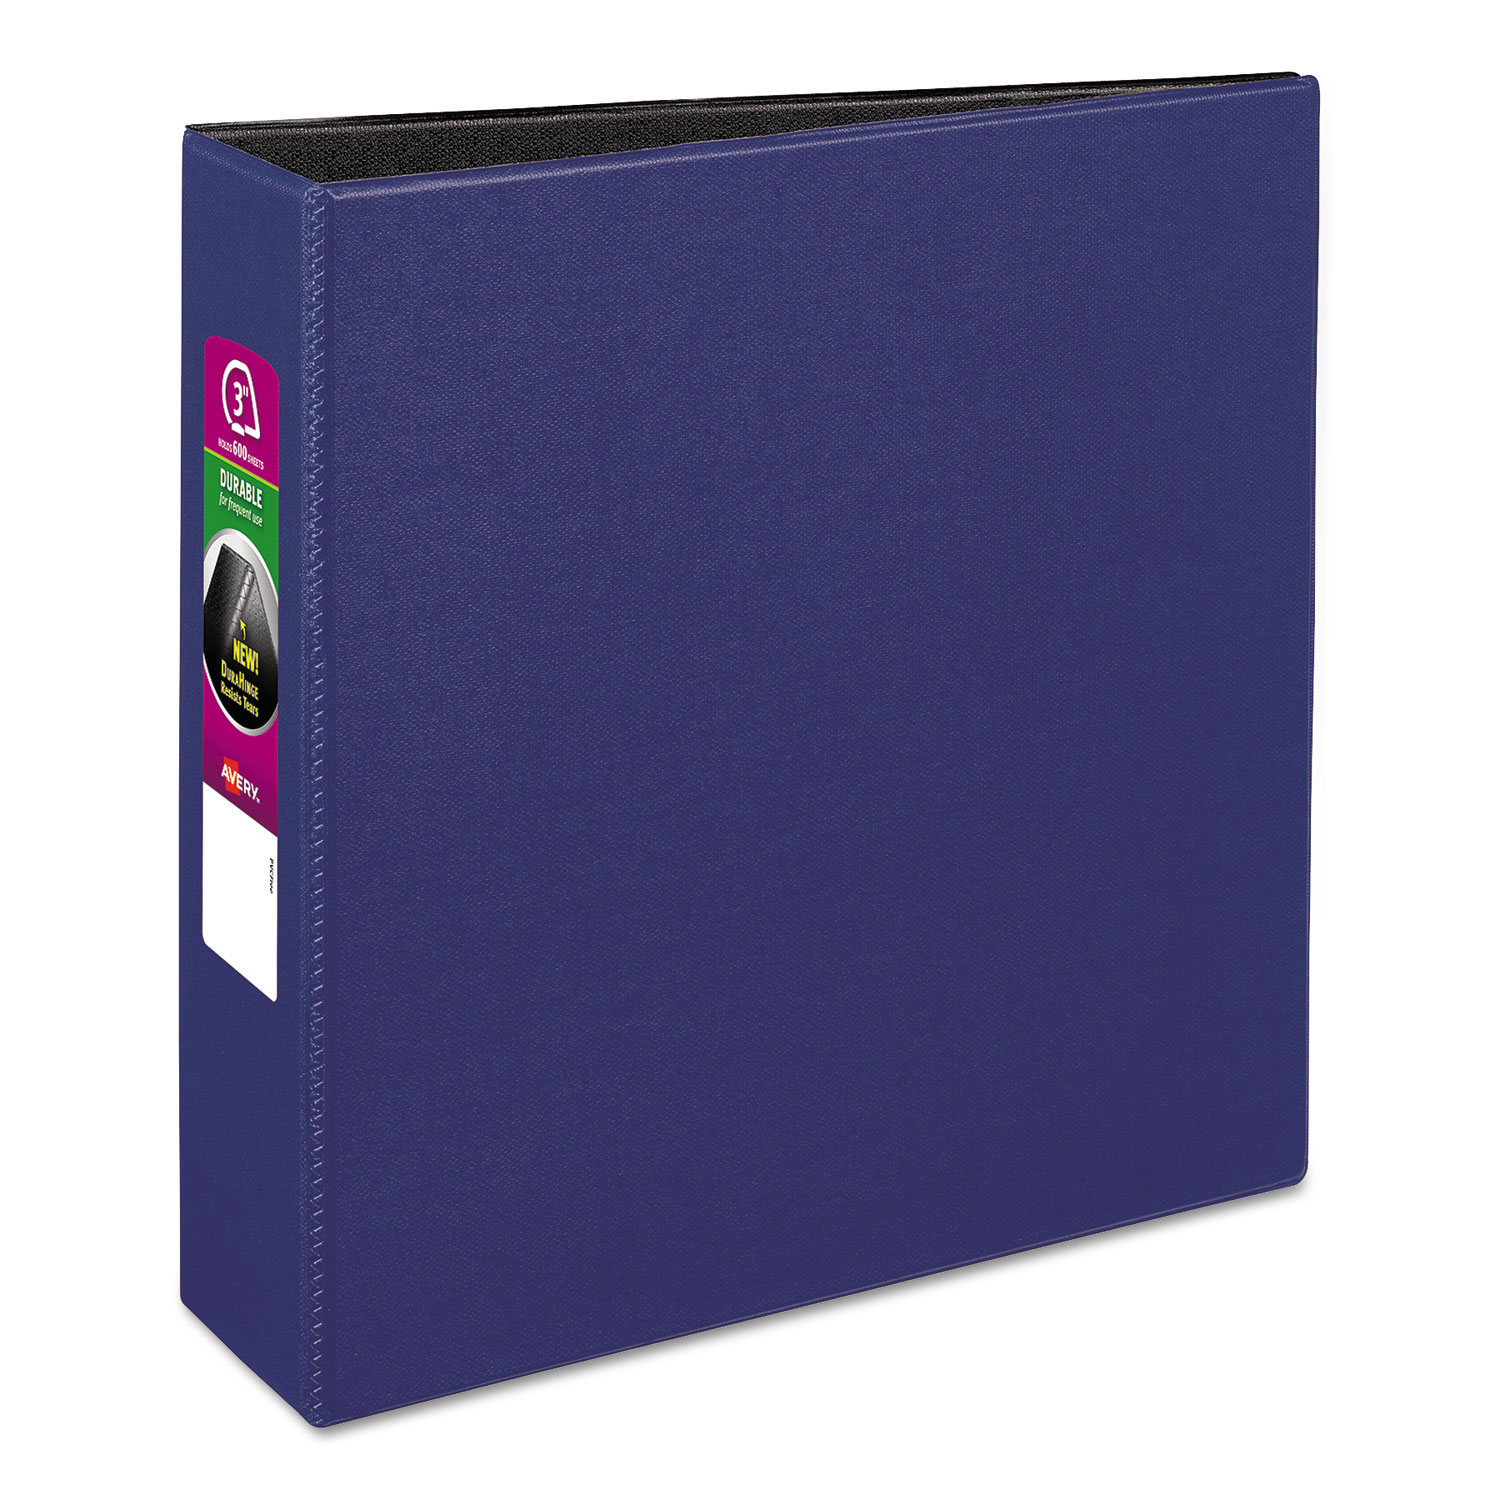  Avery 27651 Durable Non-View Binder with DuraHinge and Slant Rings, 3 Rings, 3 Capacity, 11 x 8.5, Blue (AVE27651) 